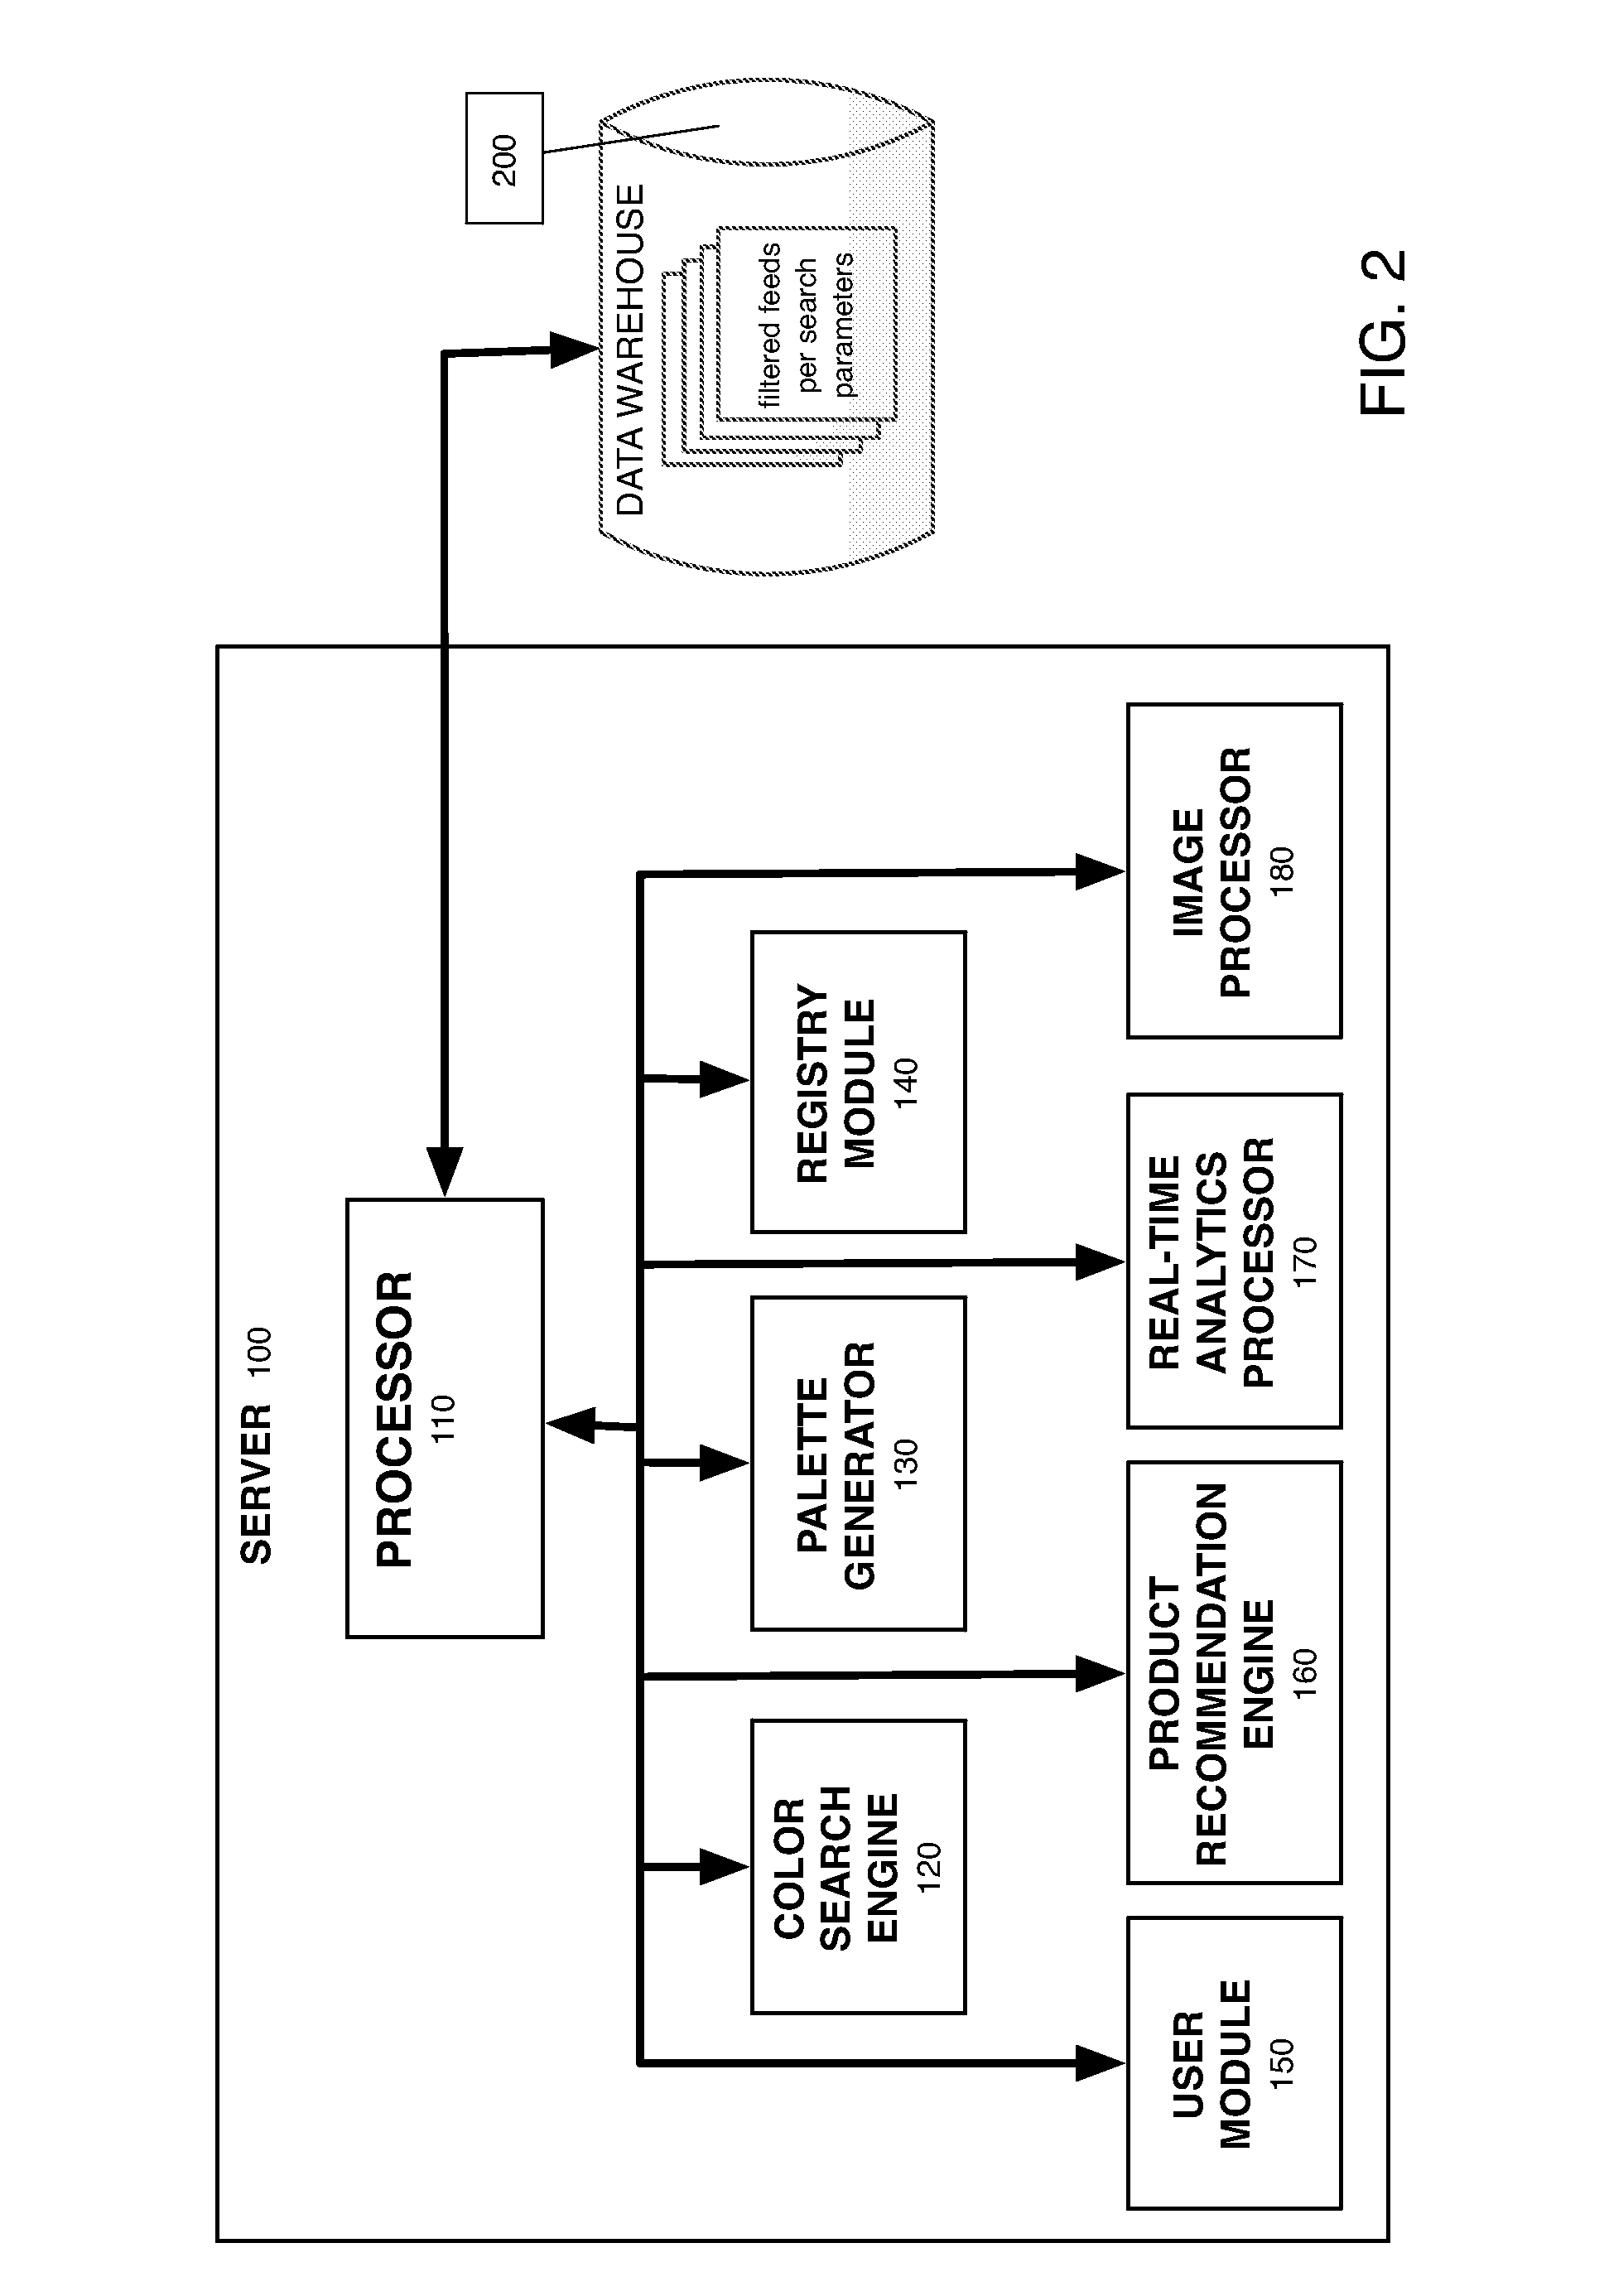 System and method for identifying, searching and matching products based on color